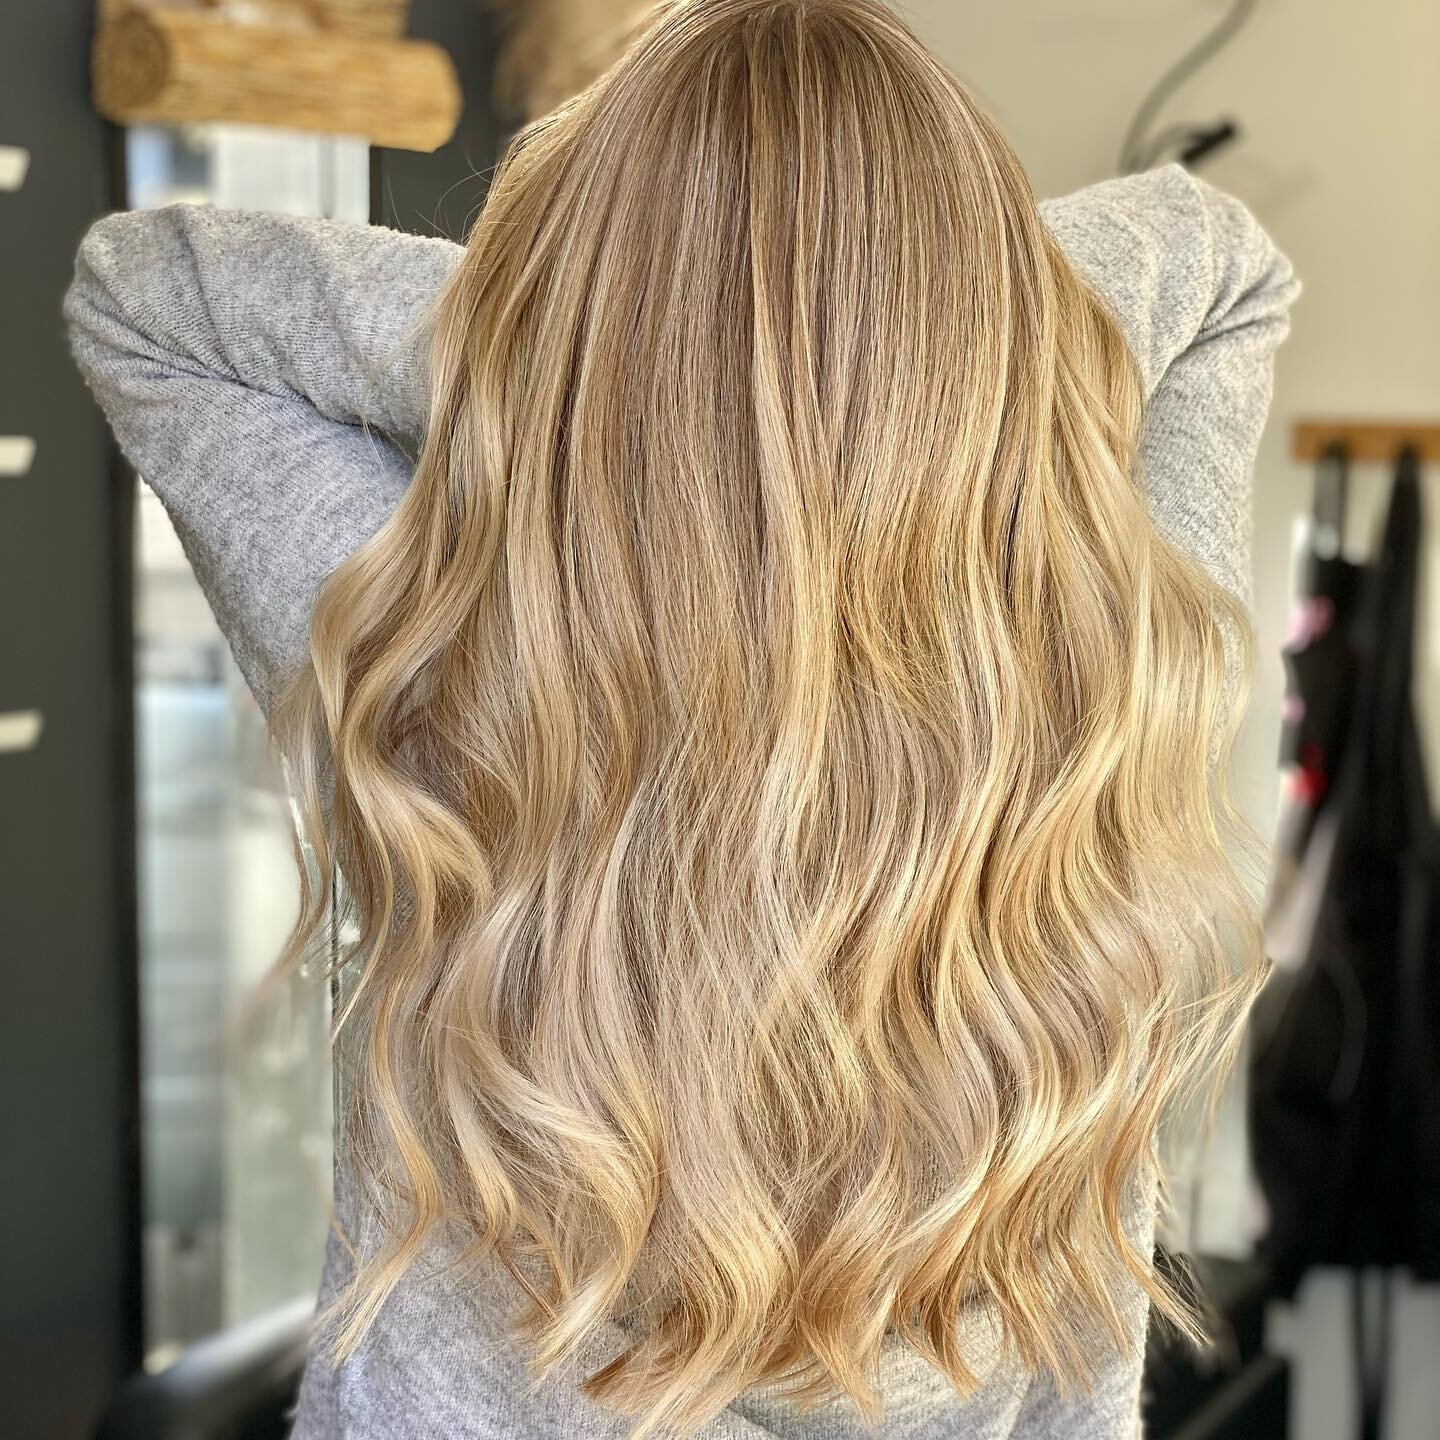 The ultimate blonde refresh after a year out of my salon chair 😮💕

How long do you think this took to do? Answers on a postcard please (or just in the comments 😂). 

#ultimateblondebabe #blondehair #blondebalayage #blondefoilyage #longblondehair #